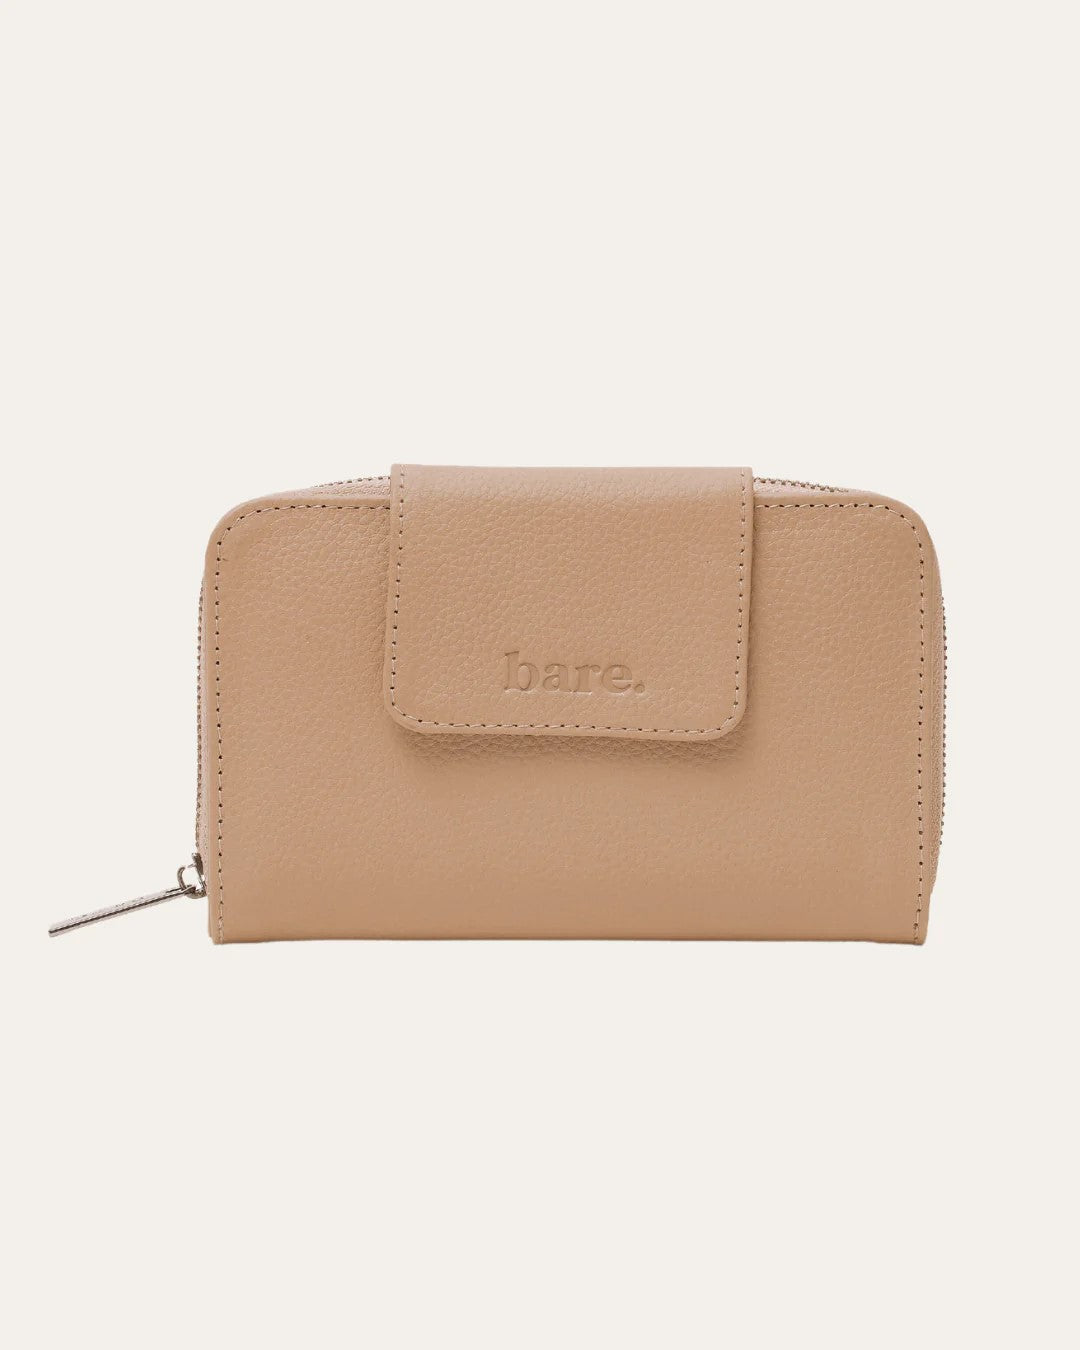 The Jorja Wallet is the perfect combo of functionality and timelessness - with a compact size that'll fit all your essentials, plus a secure fold-over flap with a magnetic clasp that'll never let you down.  It's the kind of wallet that'll become your forever companion!